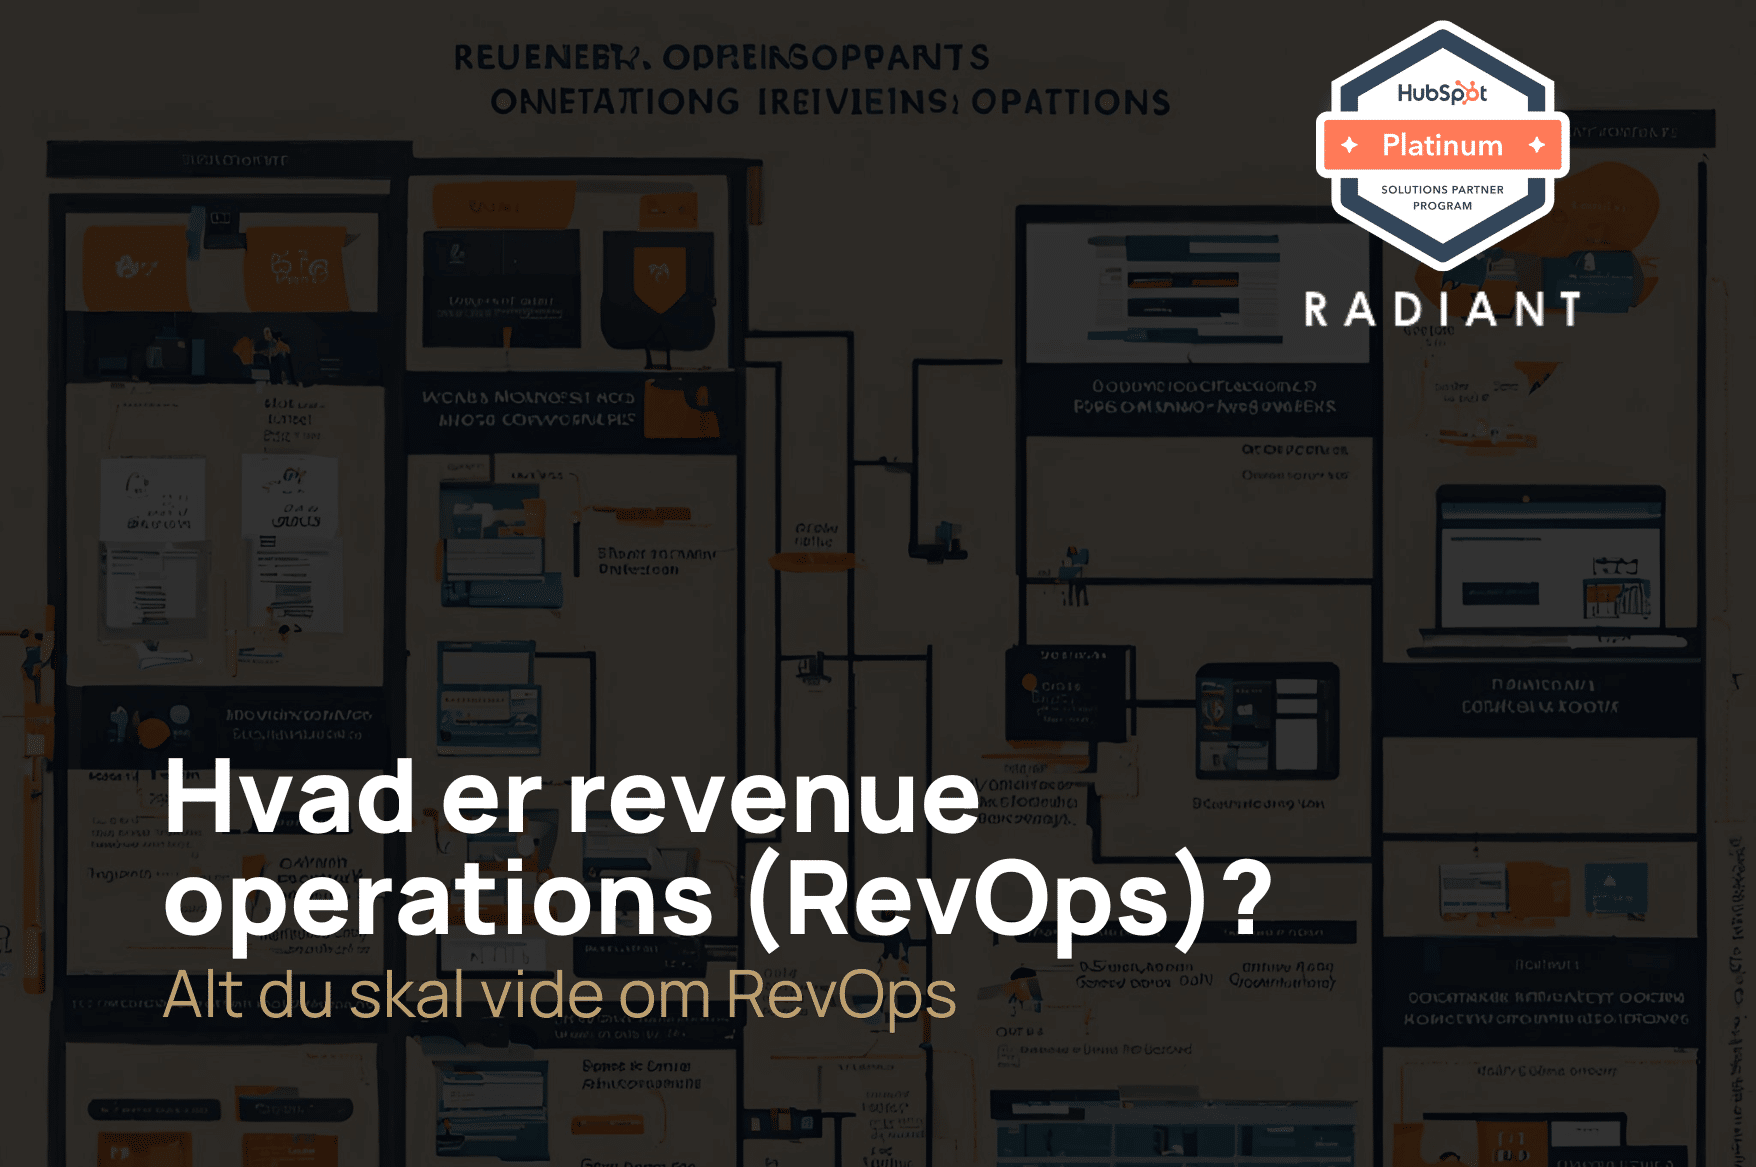 What is revenue operations (RevOps)?